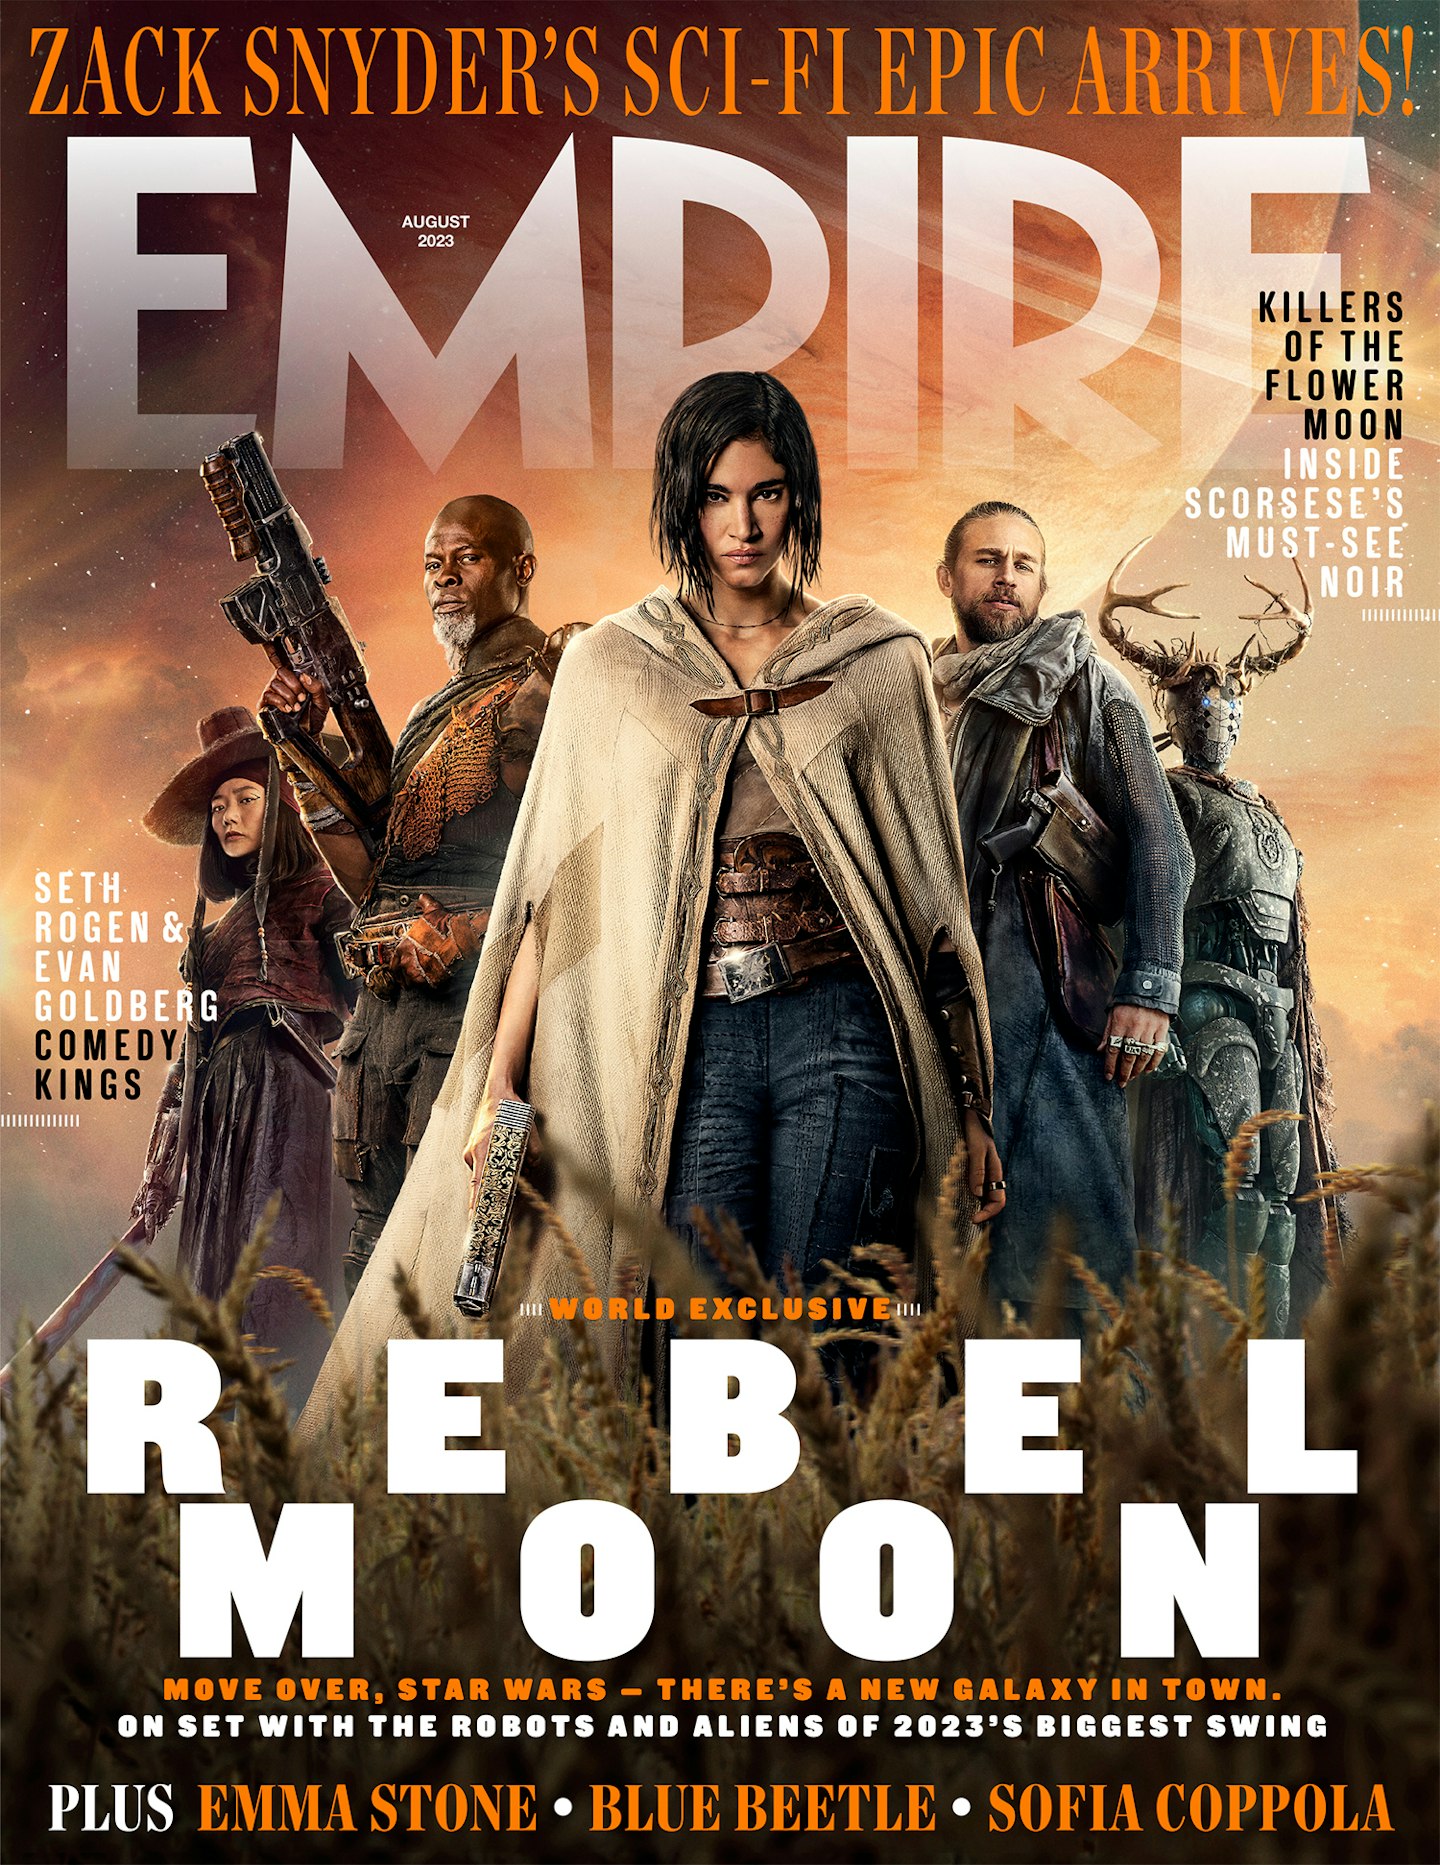 Rebel Moon: Zack Snyder's New Netflix Epic Is An R-Rated Star Wars Story -  DMARGE